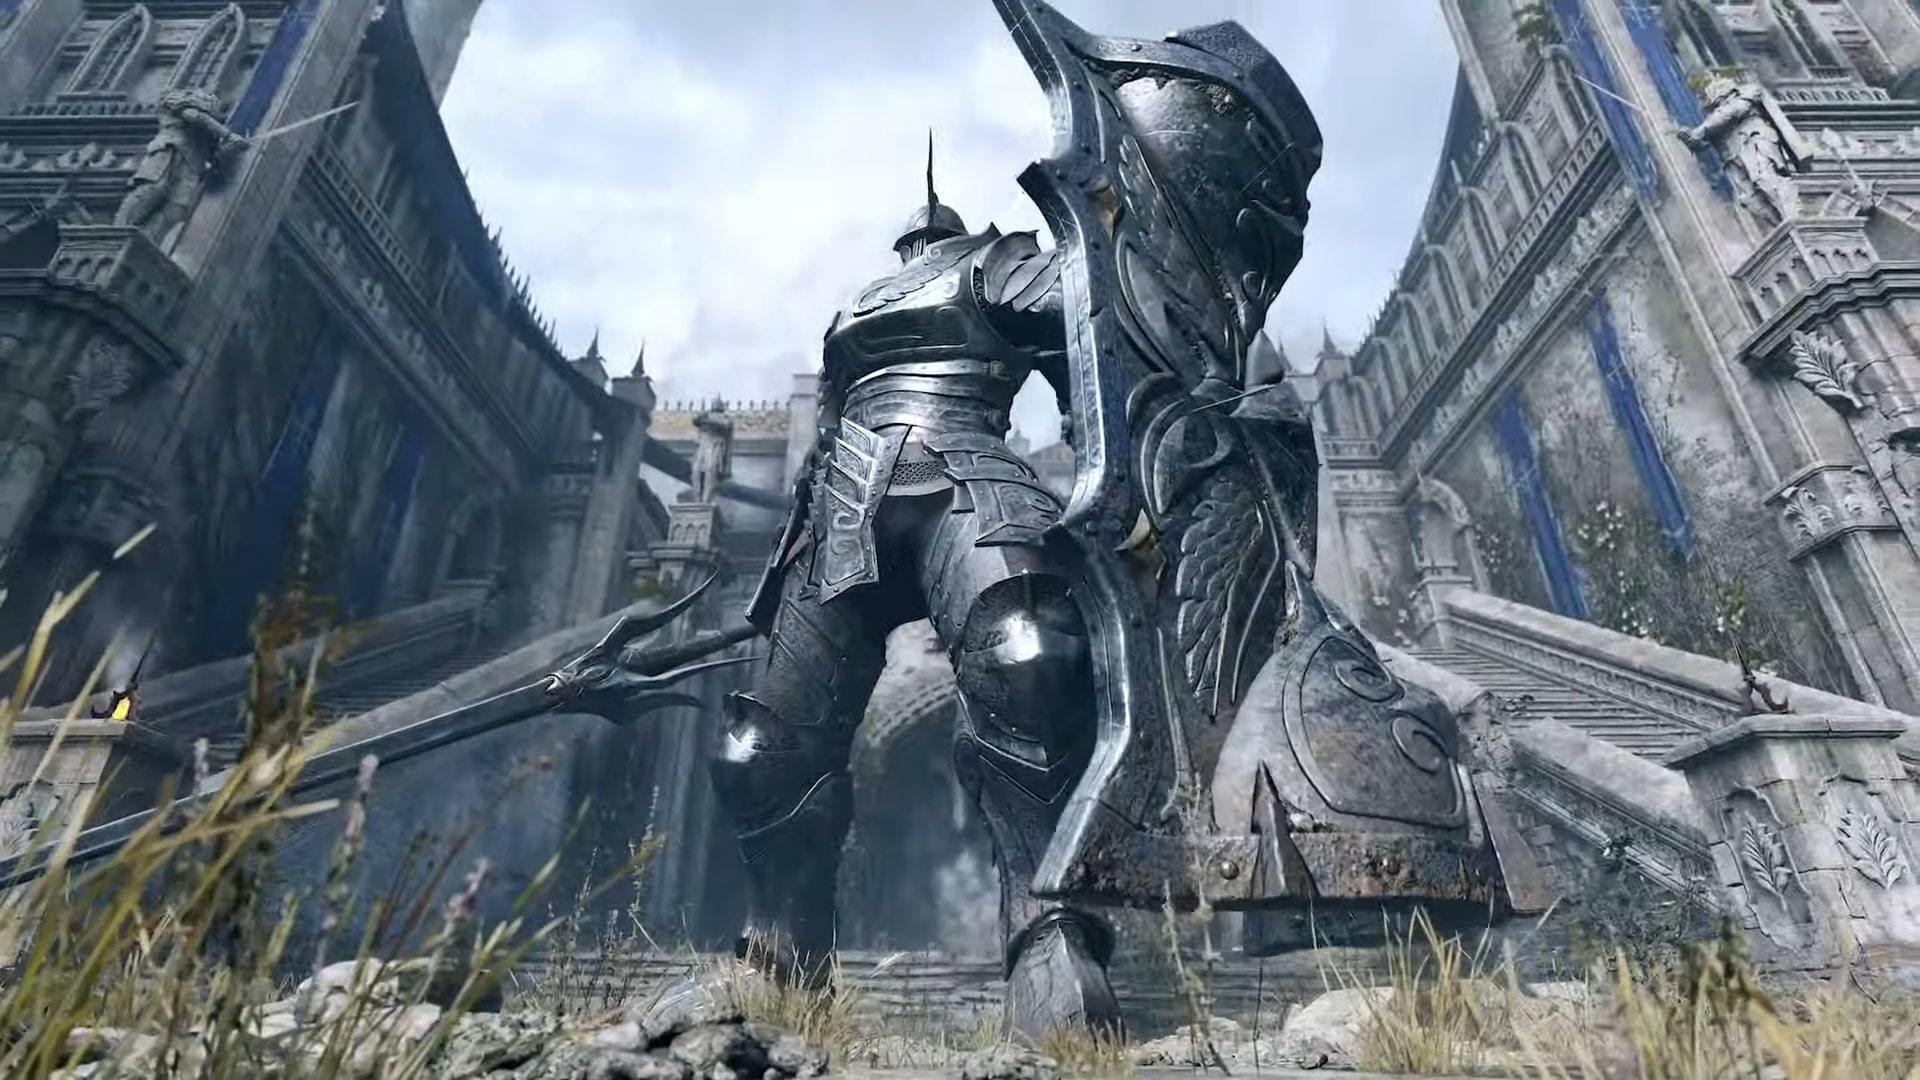 level barn elephant How The Demon's Souls Remake on PS5 Compares To The PS3 Original - GameSpot